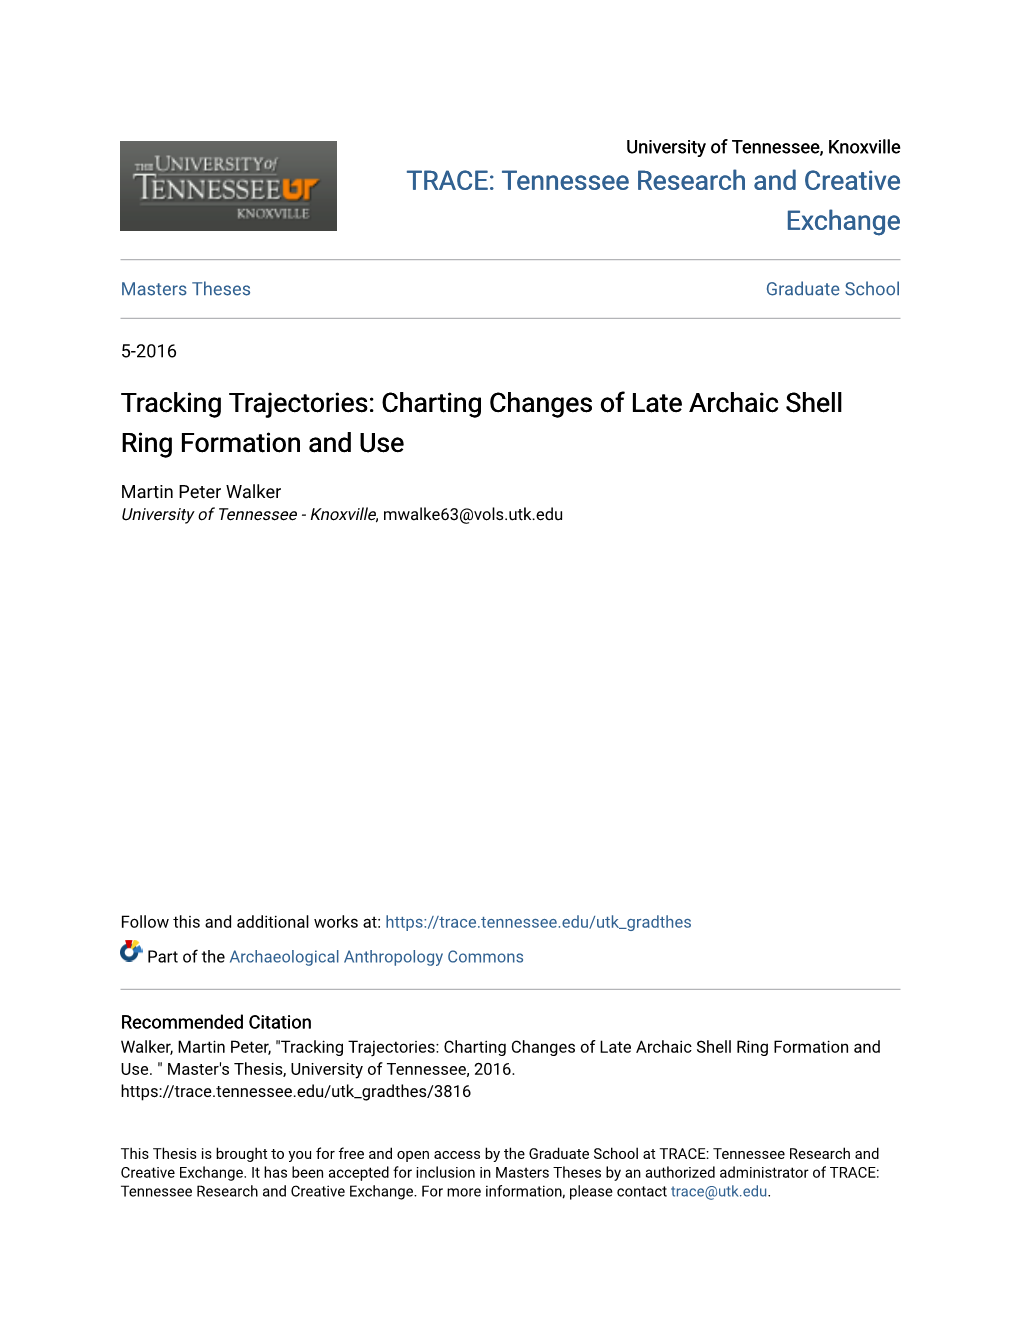 Charting Changes of Late Archaic Shell Ring Formation and Use